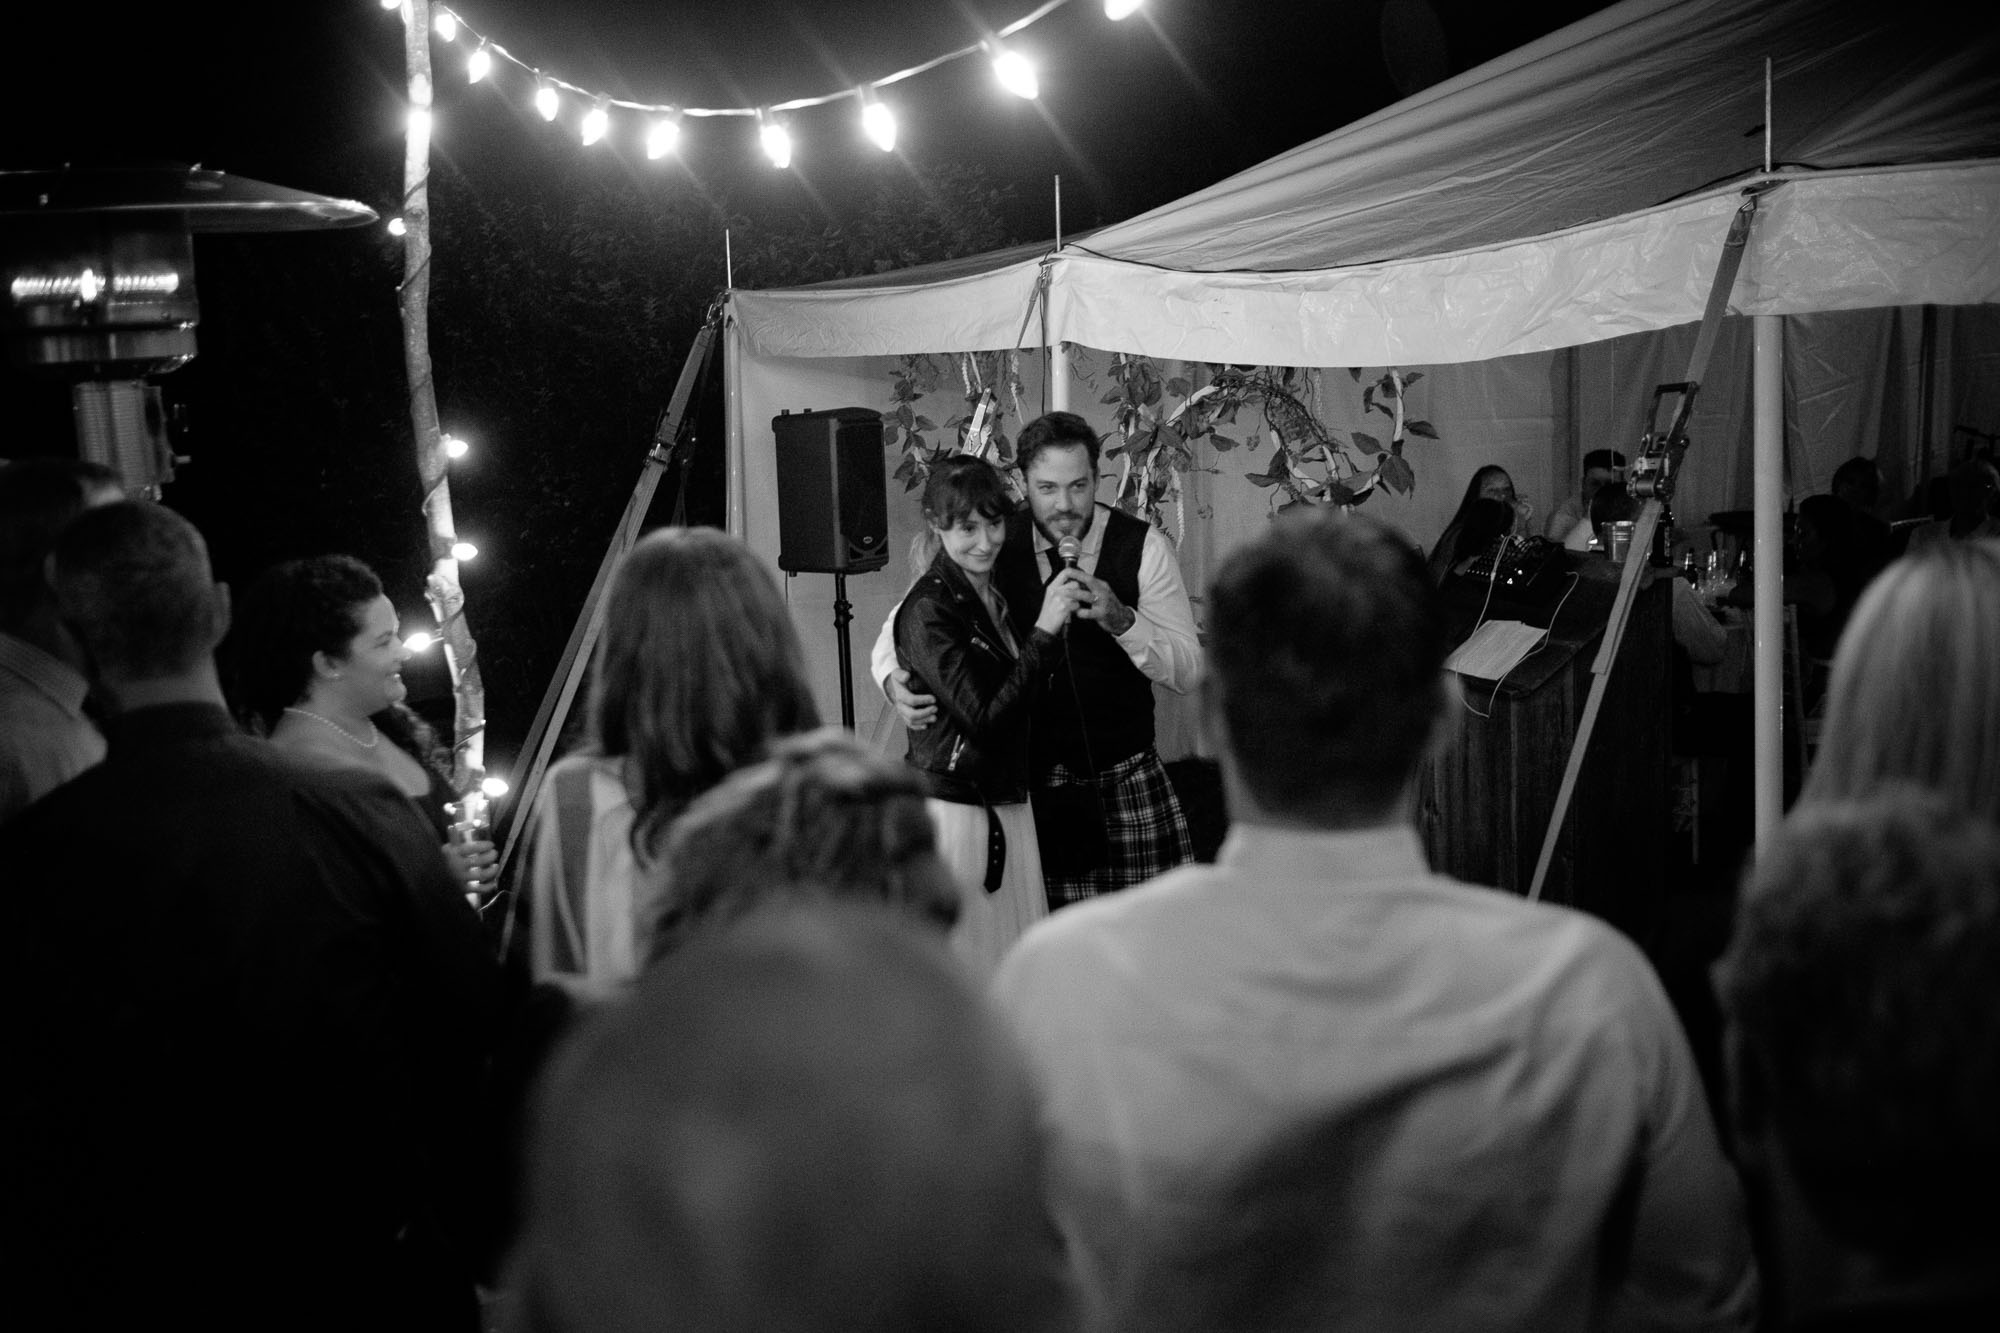  Kristin and Adam give an impromptu wedding speech to their friends and family during their wedding reception in Ontario. &nbsp;Photograph by Scott Williams. 